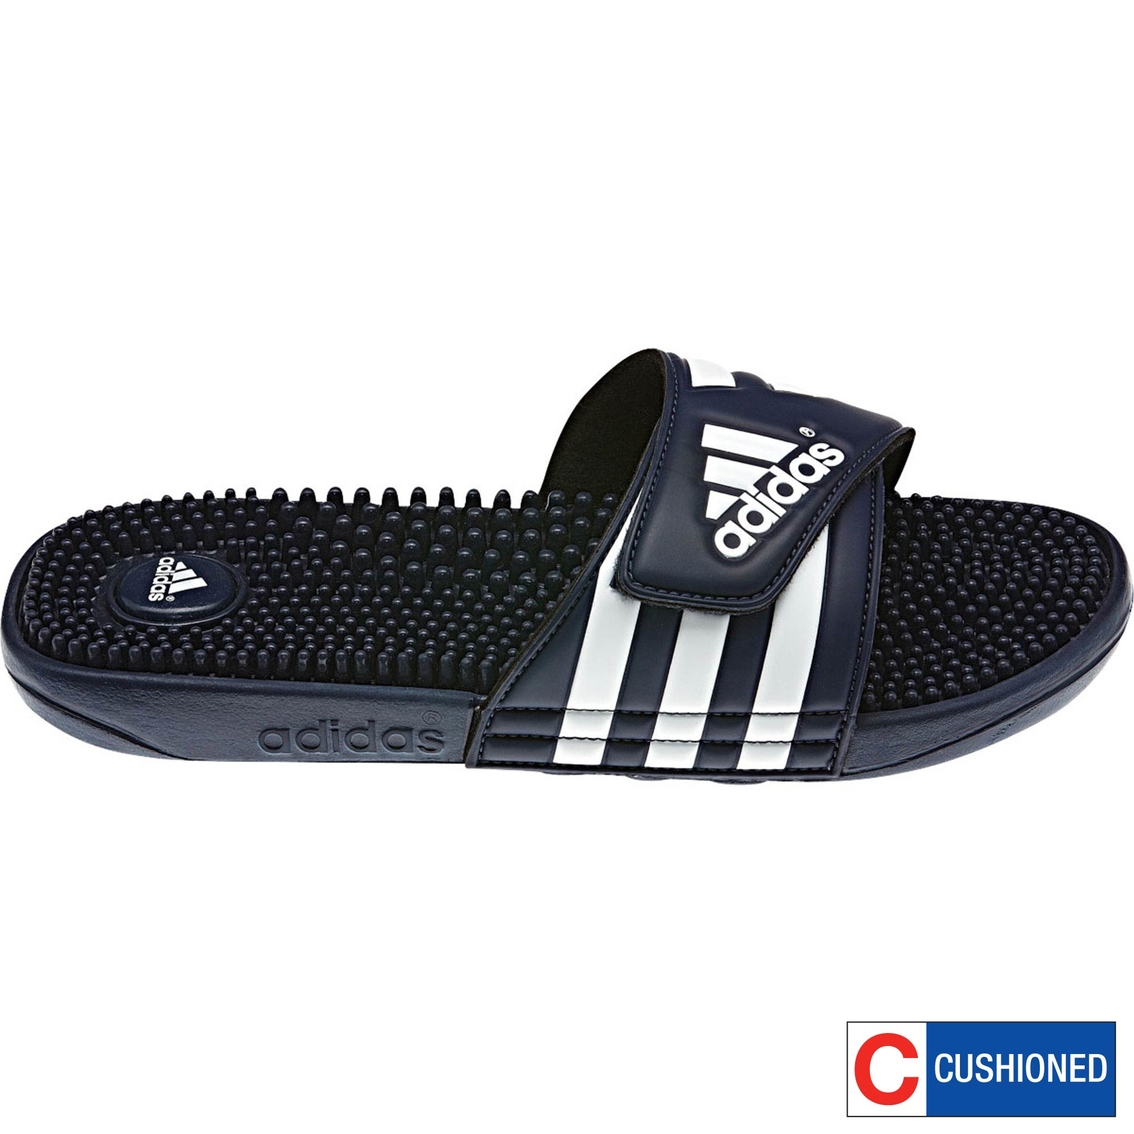 adidas cushioned slippers